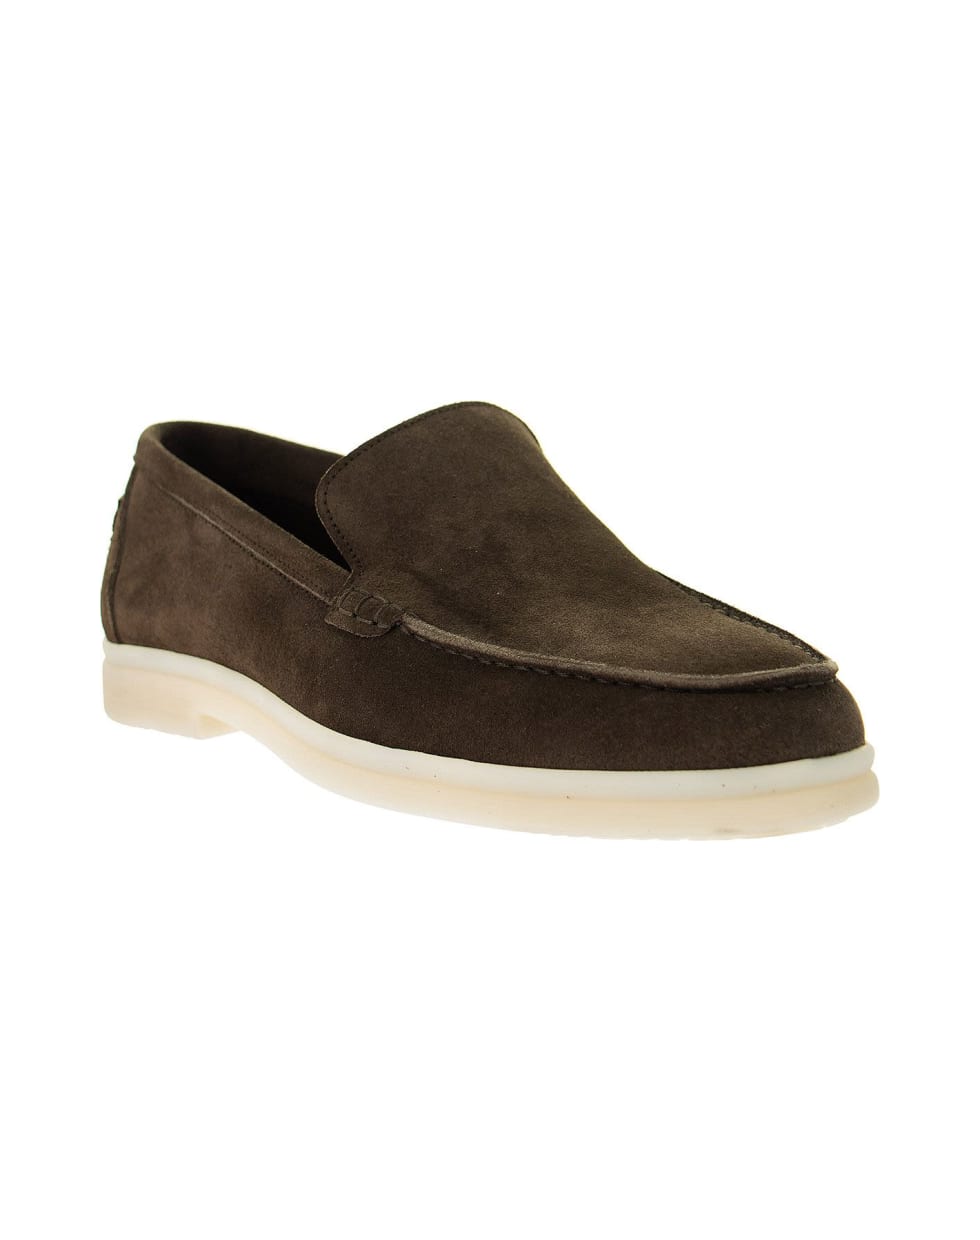 Berwick 1707 Suede Loafer - Brown